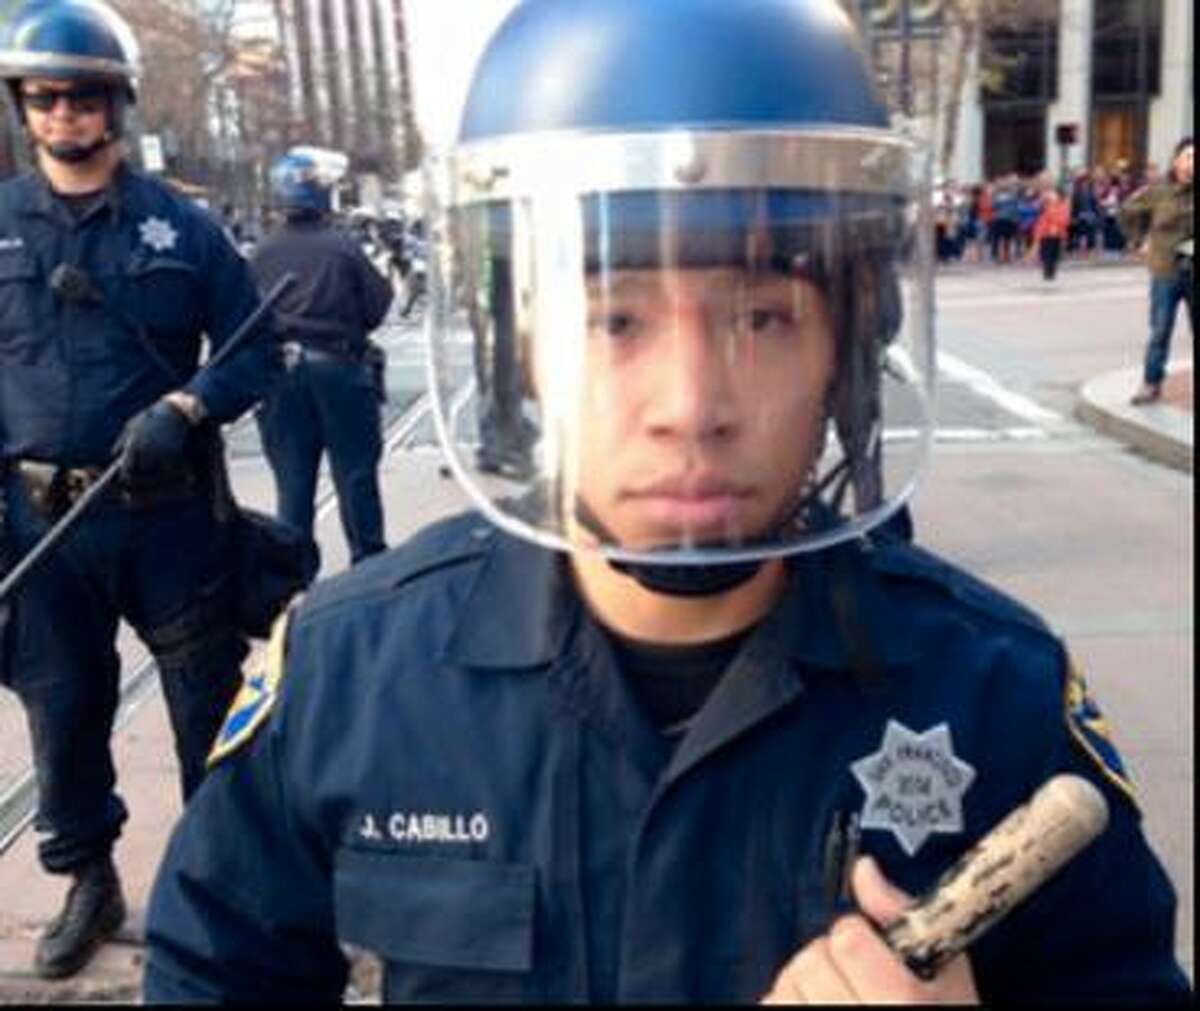 Officer Joshua Cabillo shot a fleeing man June 9 in a busy North Beach nightlife area.